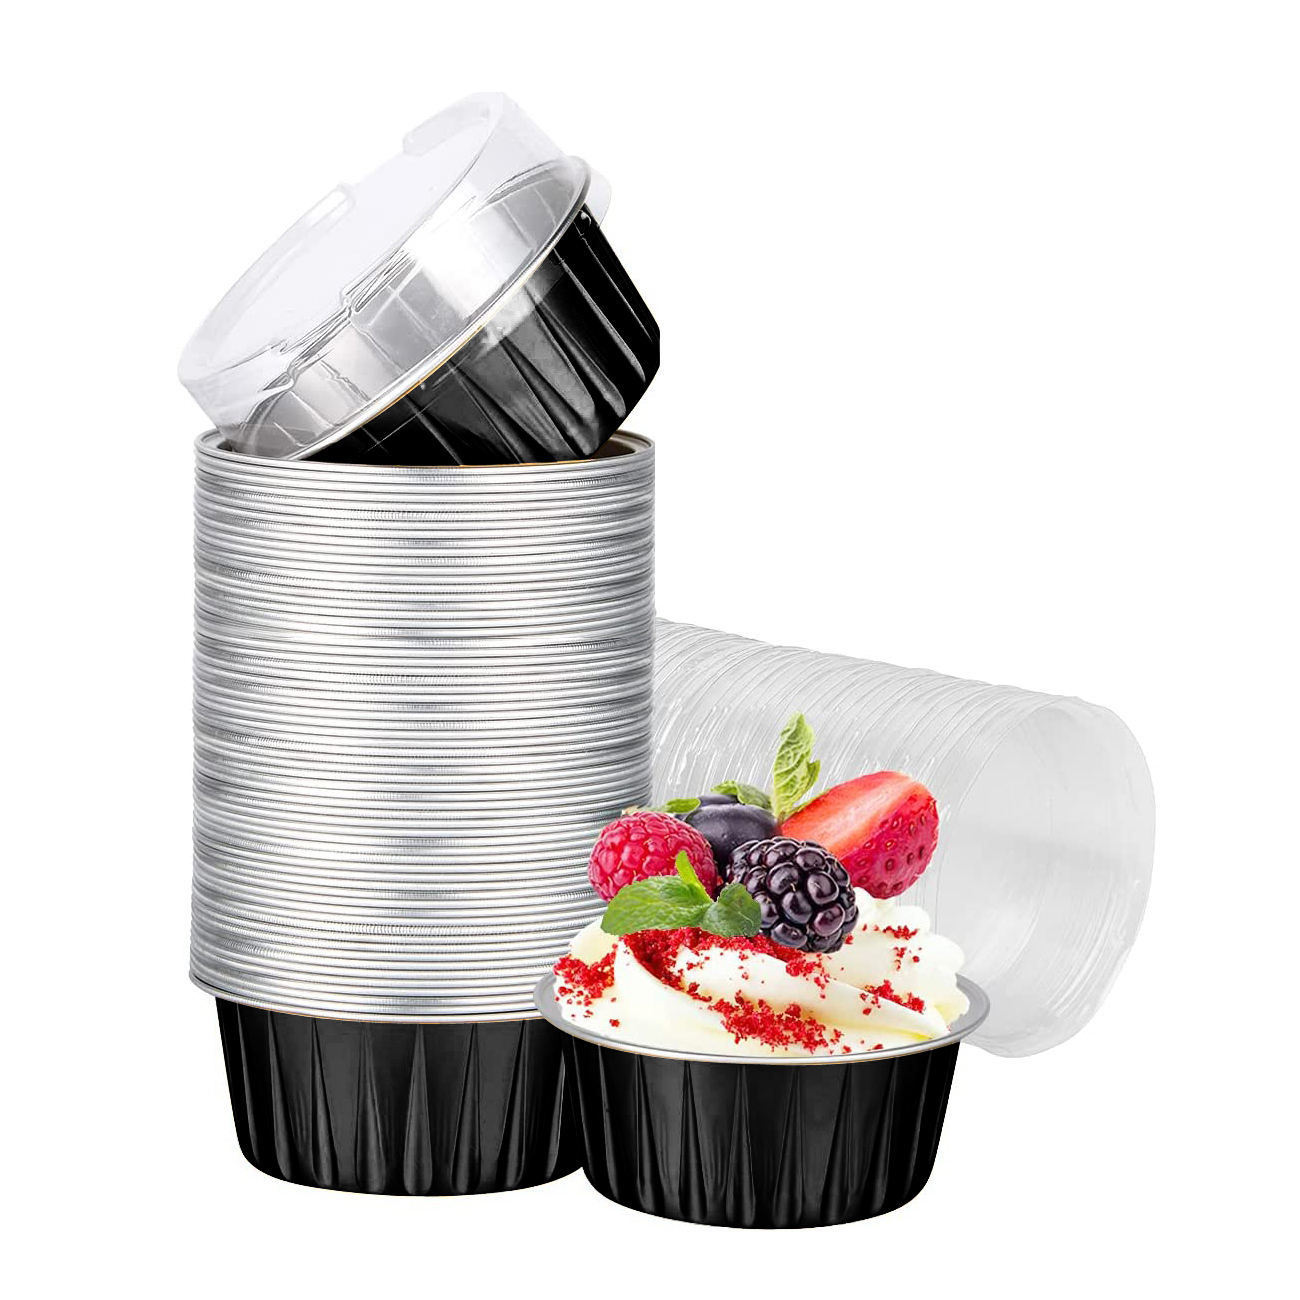 Aluminum Foil Cupcake Baking Cup, Disposable Mini Aluminum Cream Pudding,  Cupcake Lining, Aluminum Foil Desert Cake Pan Flan Mold Tin Foil Cup With  Lid Container For Baking Catering For Restaurant/food Truck/bakery 